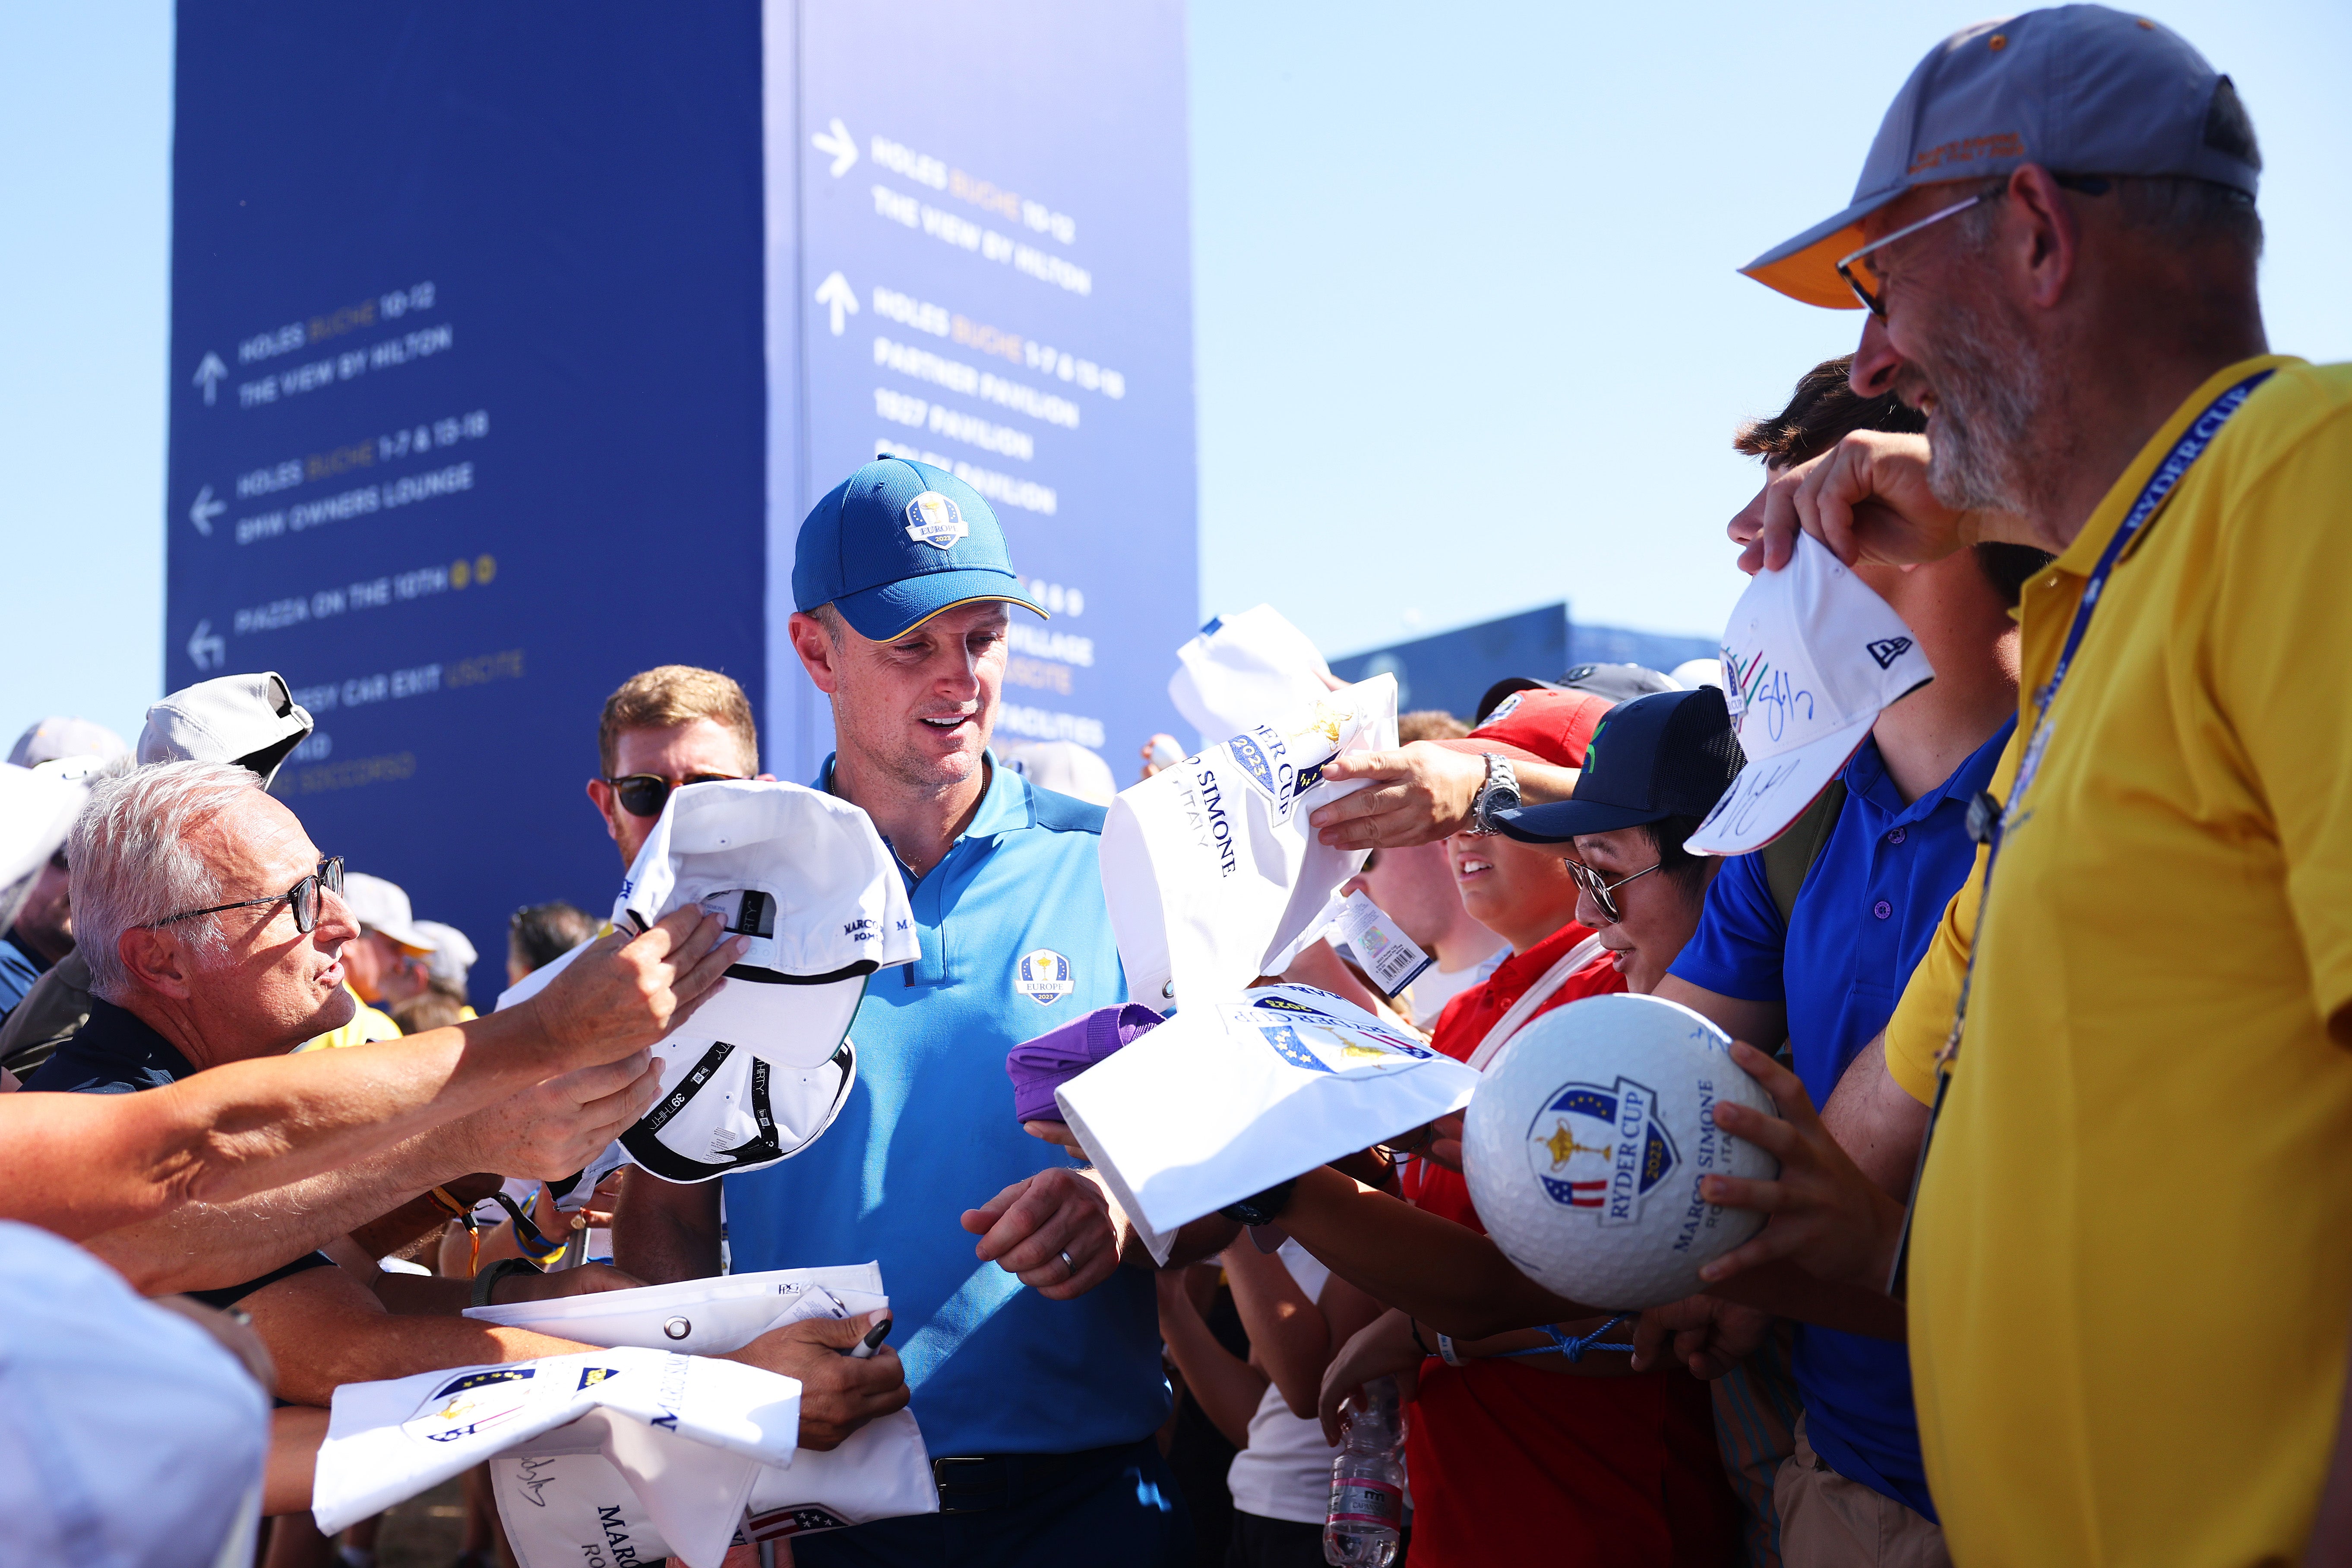 European fans swarm Justin Rose during practice on Wednesday